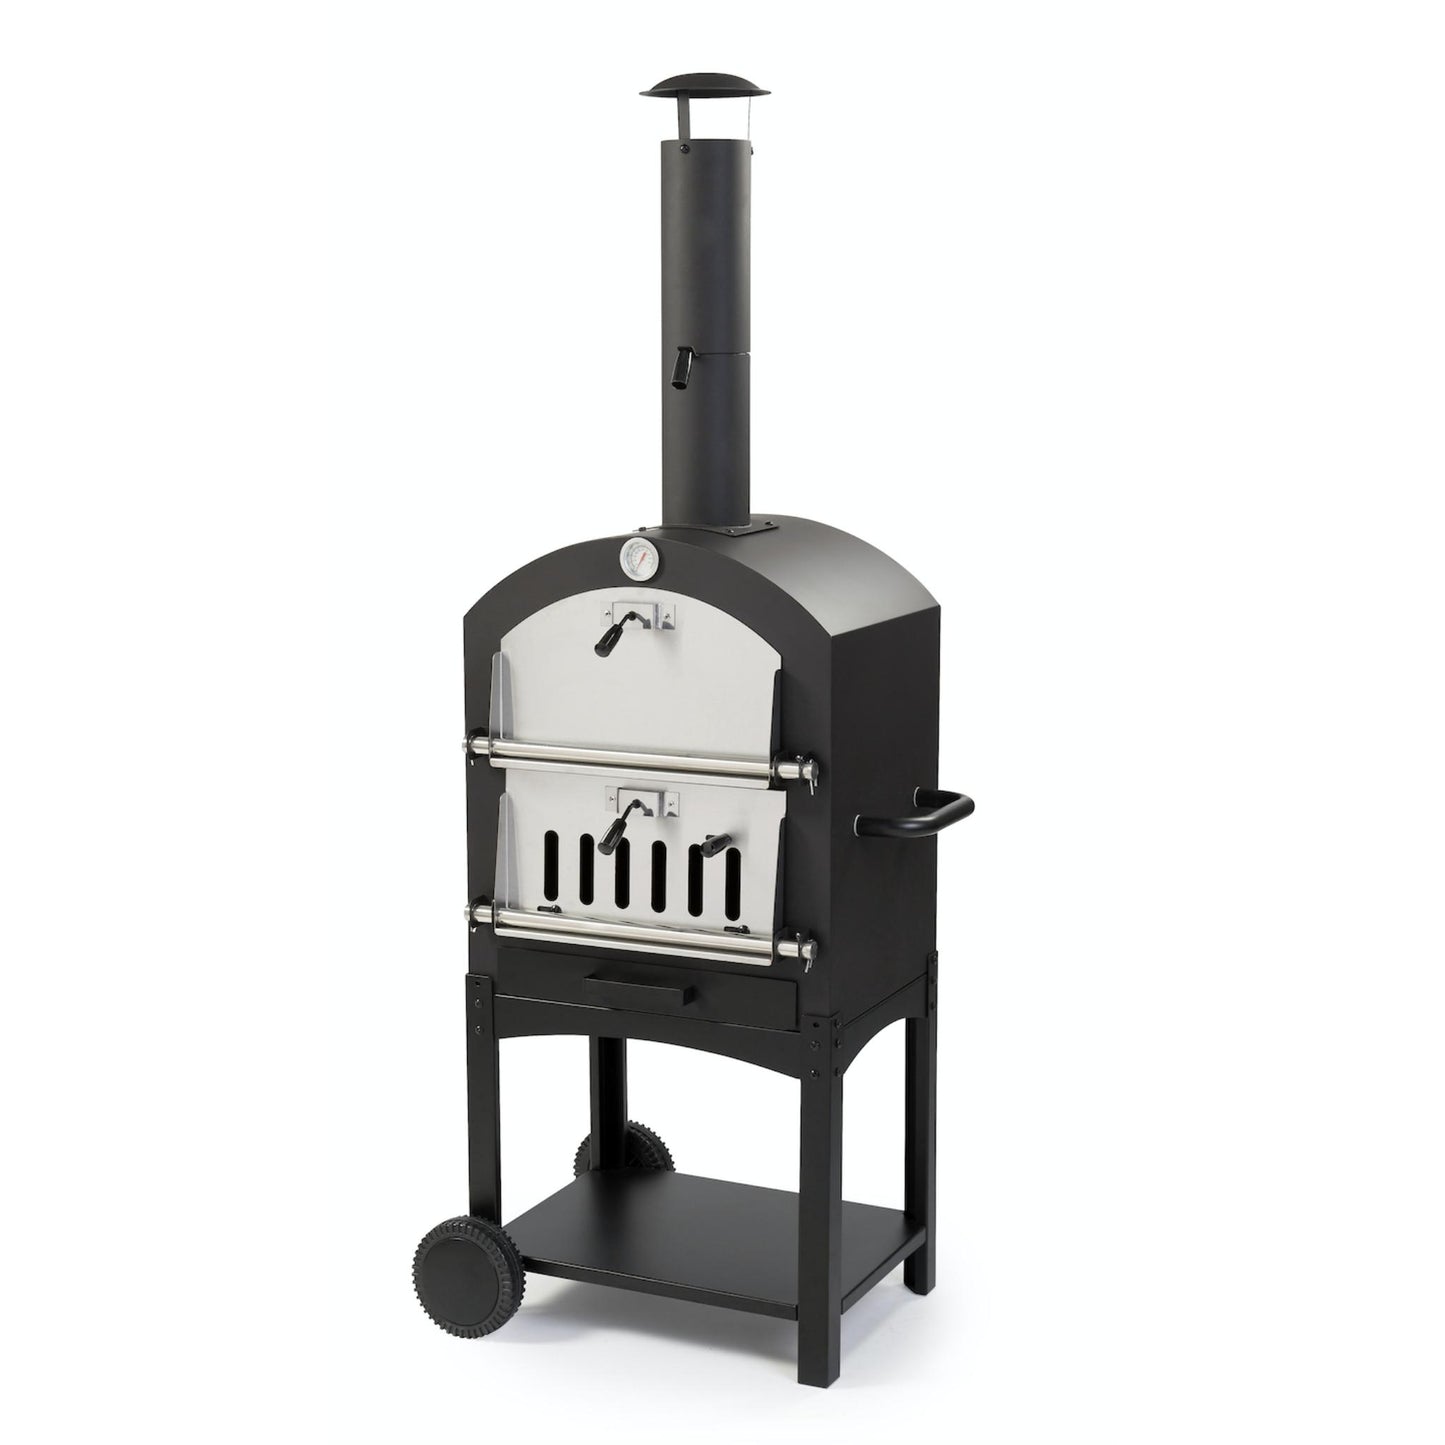 Wood Fired Garden Oven, Standalone with pizza stone. - WPPO LLC Direct